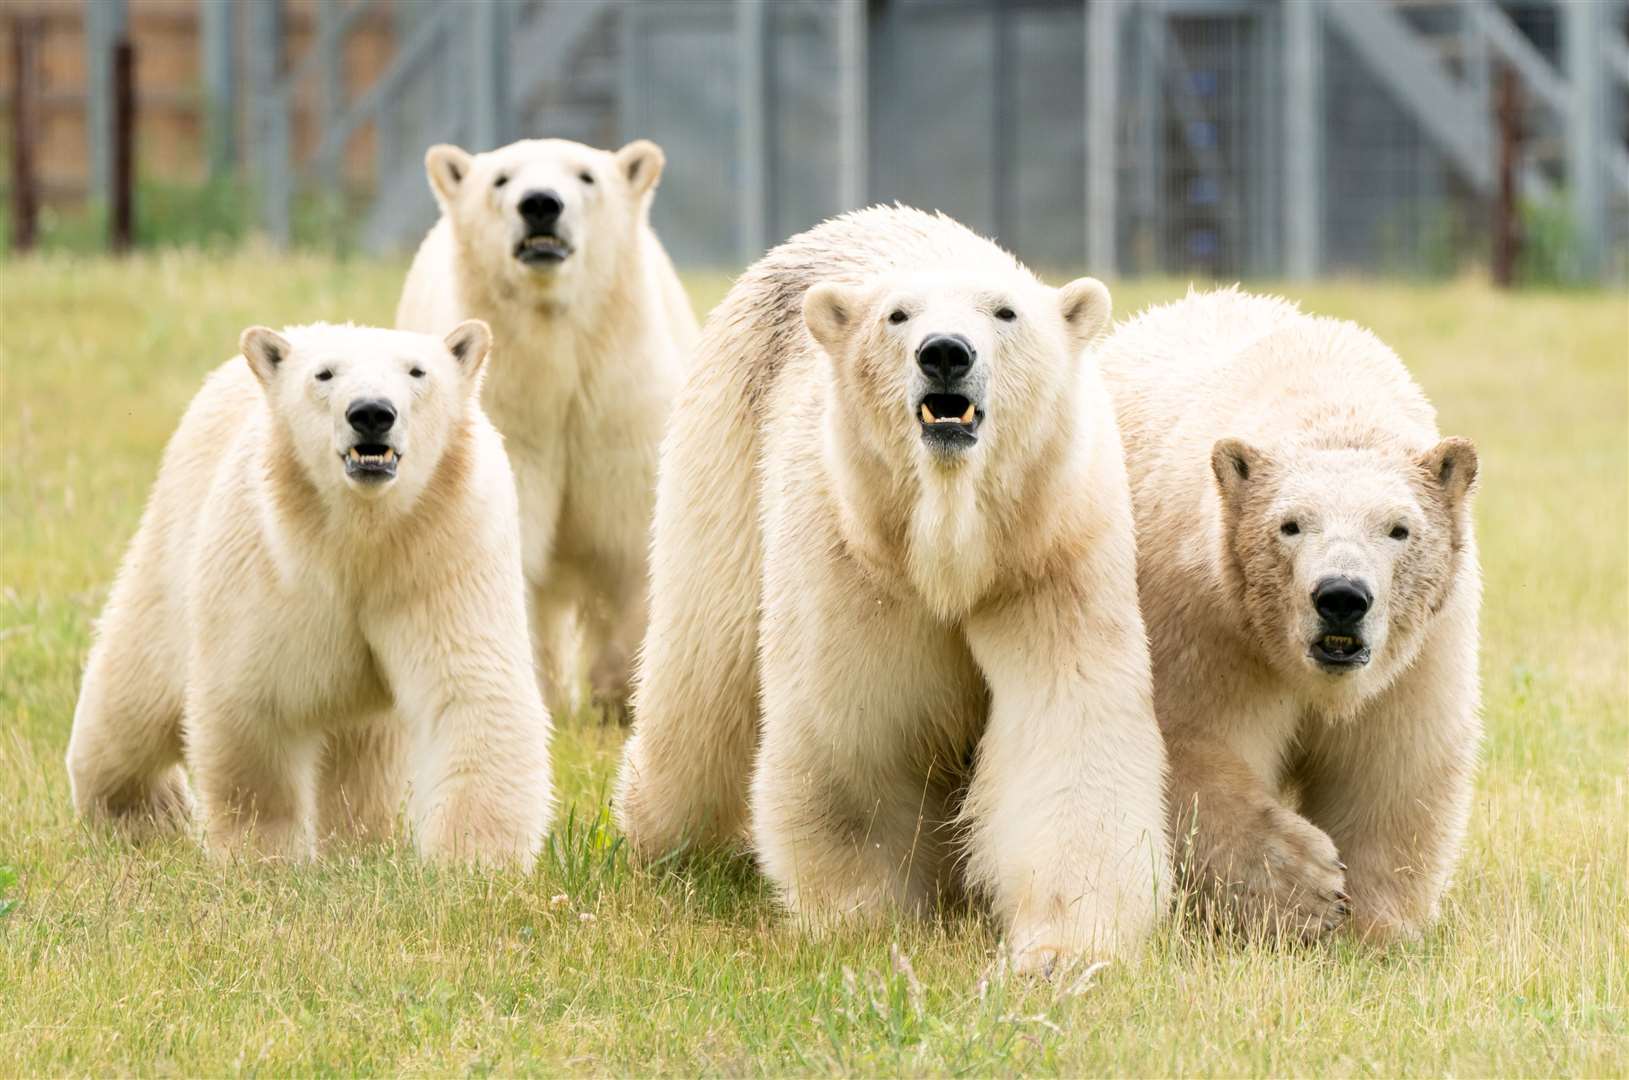 Polar bear Flocke (second right) and her three cubs Tala (left), Yuma (second left) and Indiana (right) (Danny Lawson/PA)